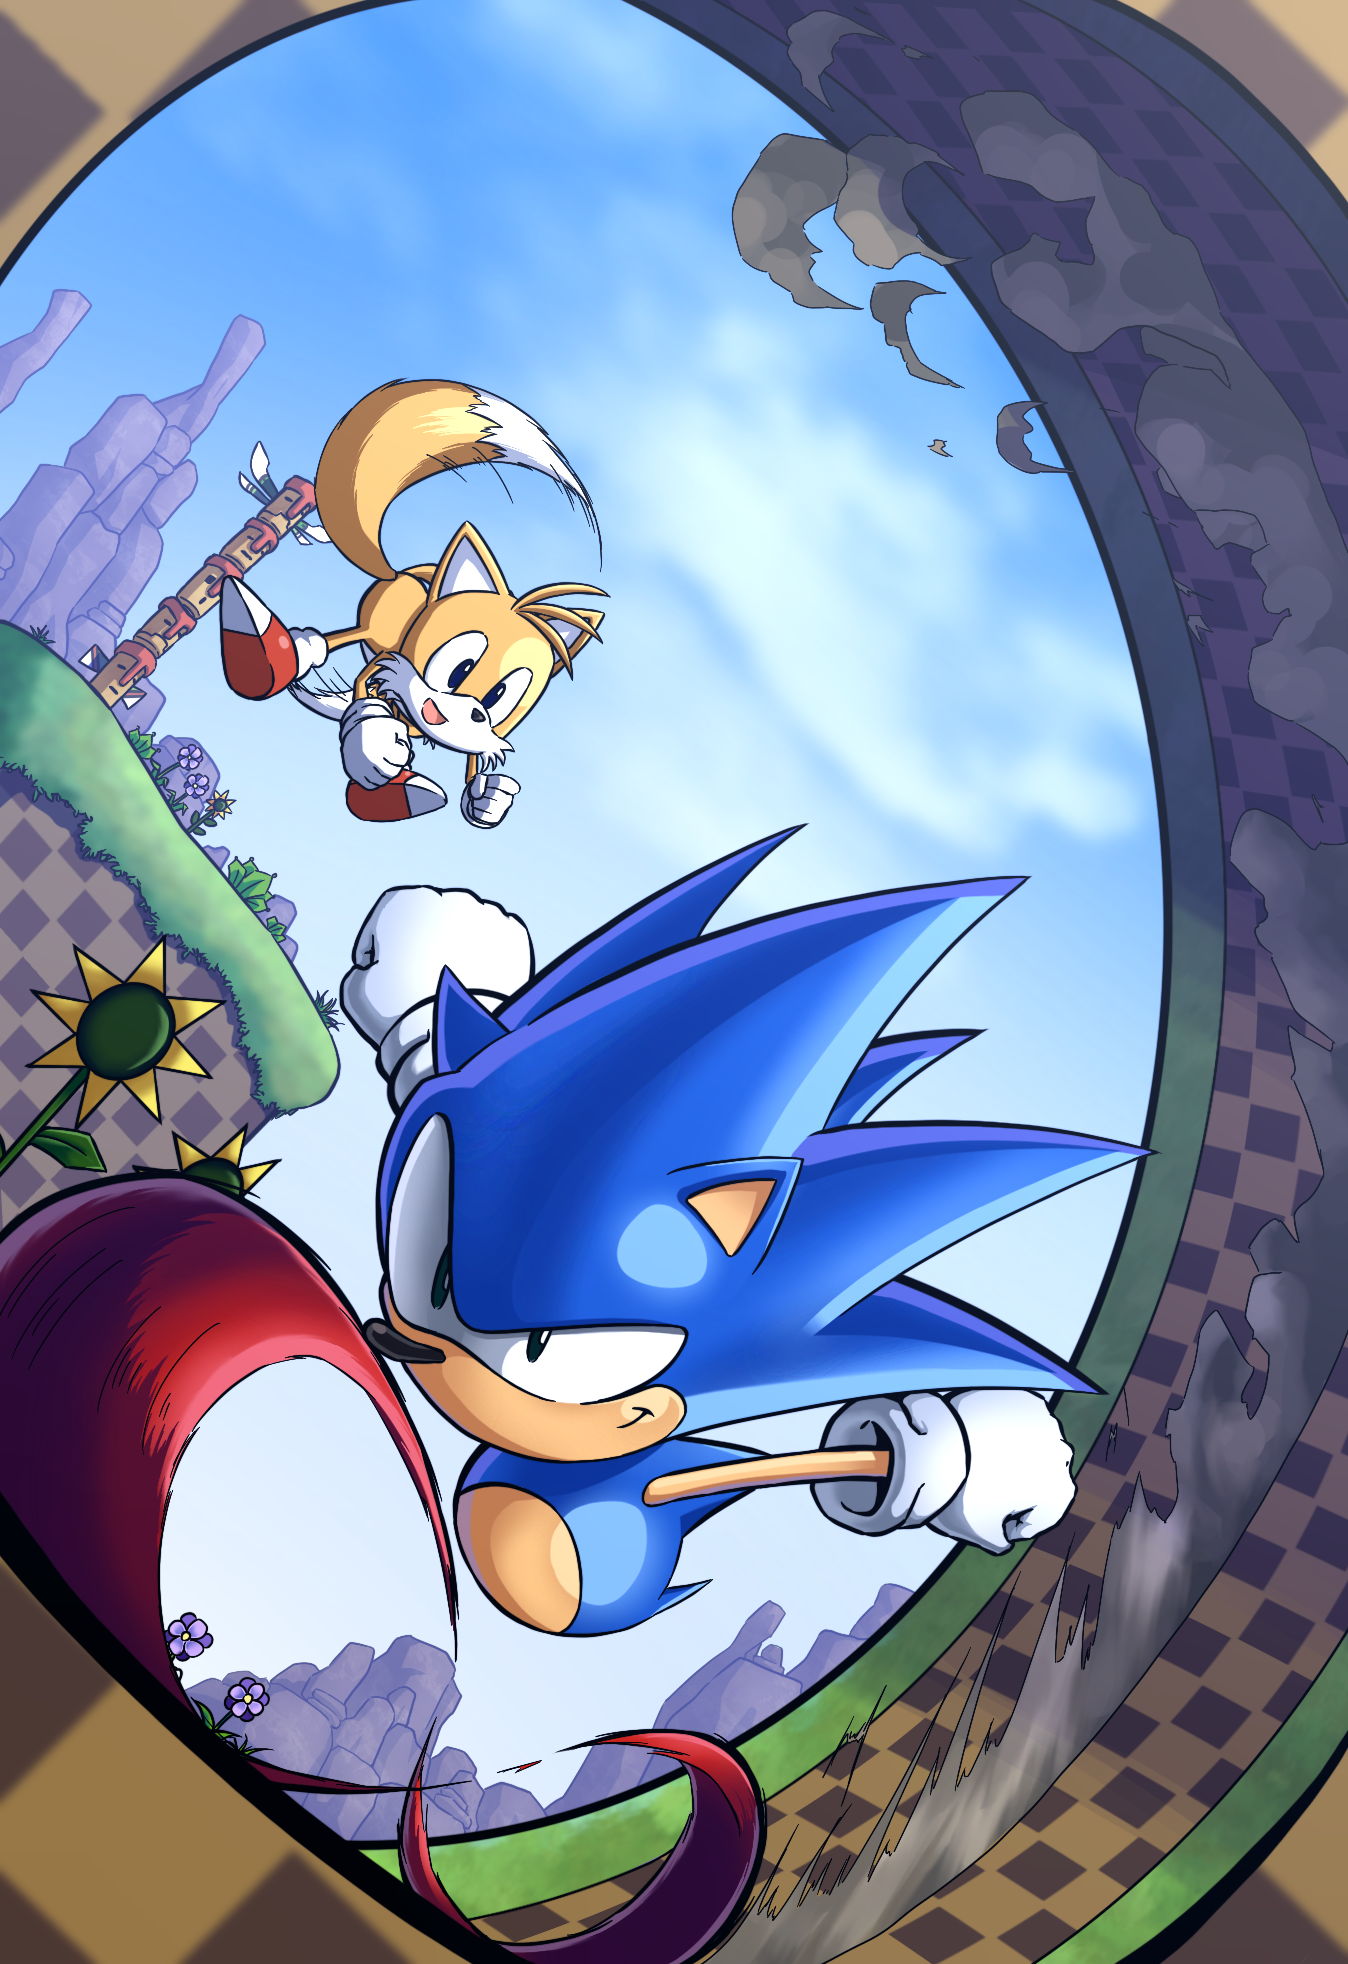 Sonic And Tails In green hill zone - Desenho de thesingleanimation